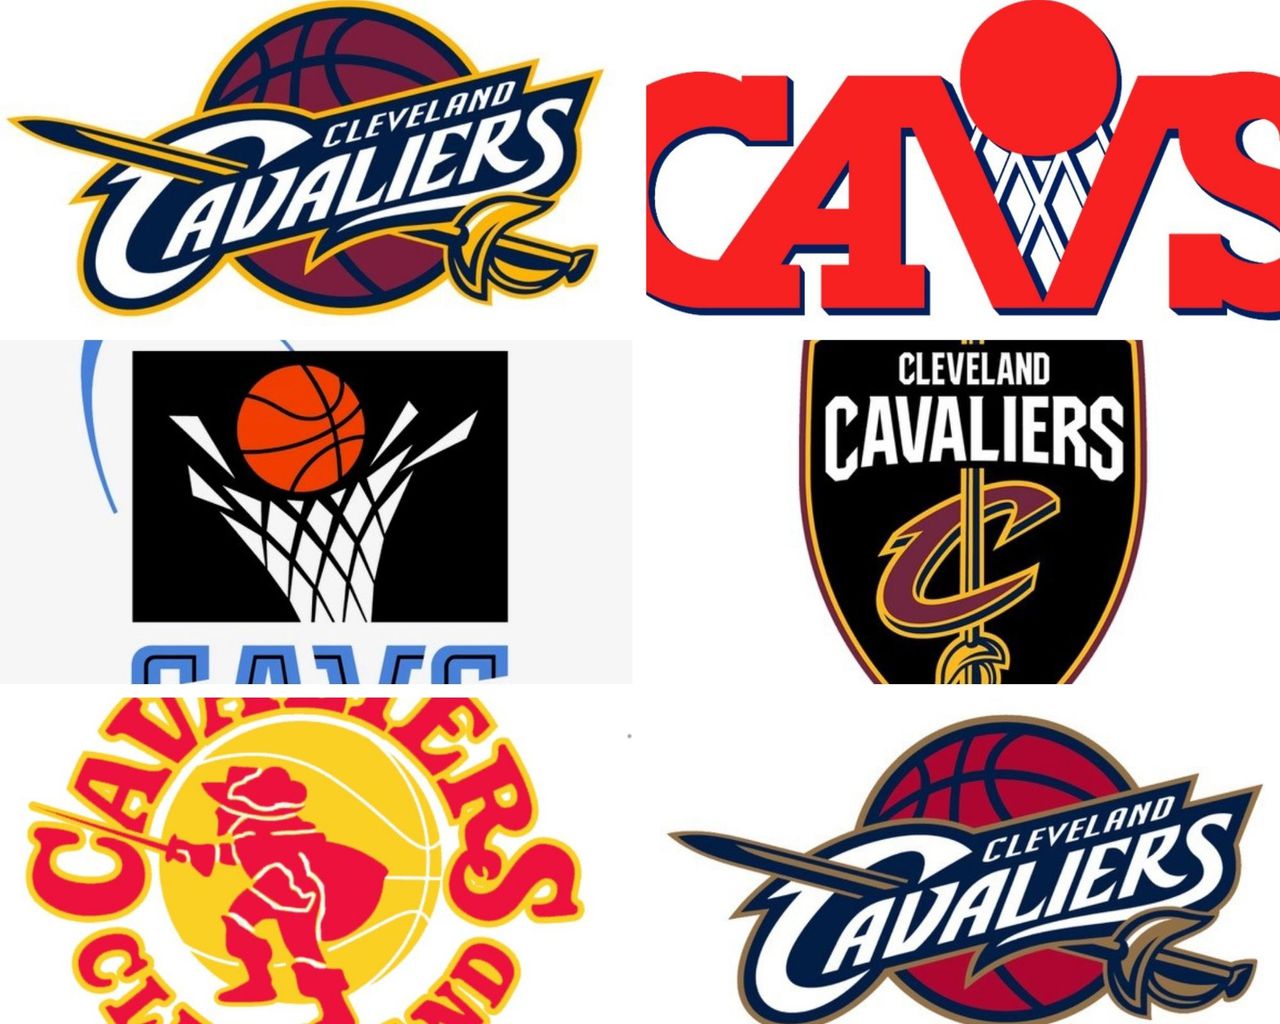 Looking at Cleveland Cavaliers logos from 1970 to current